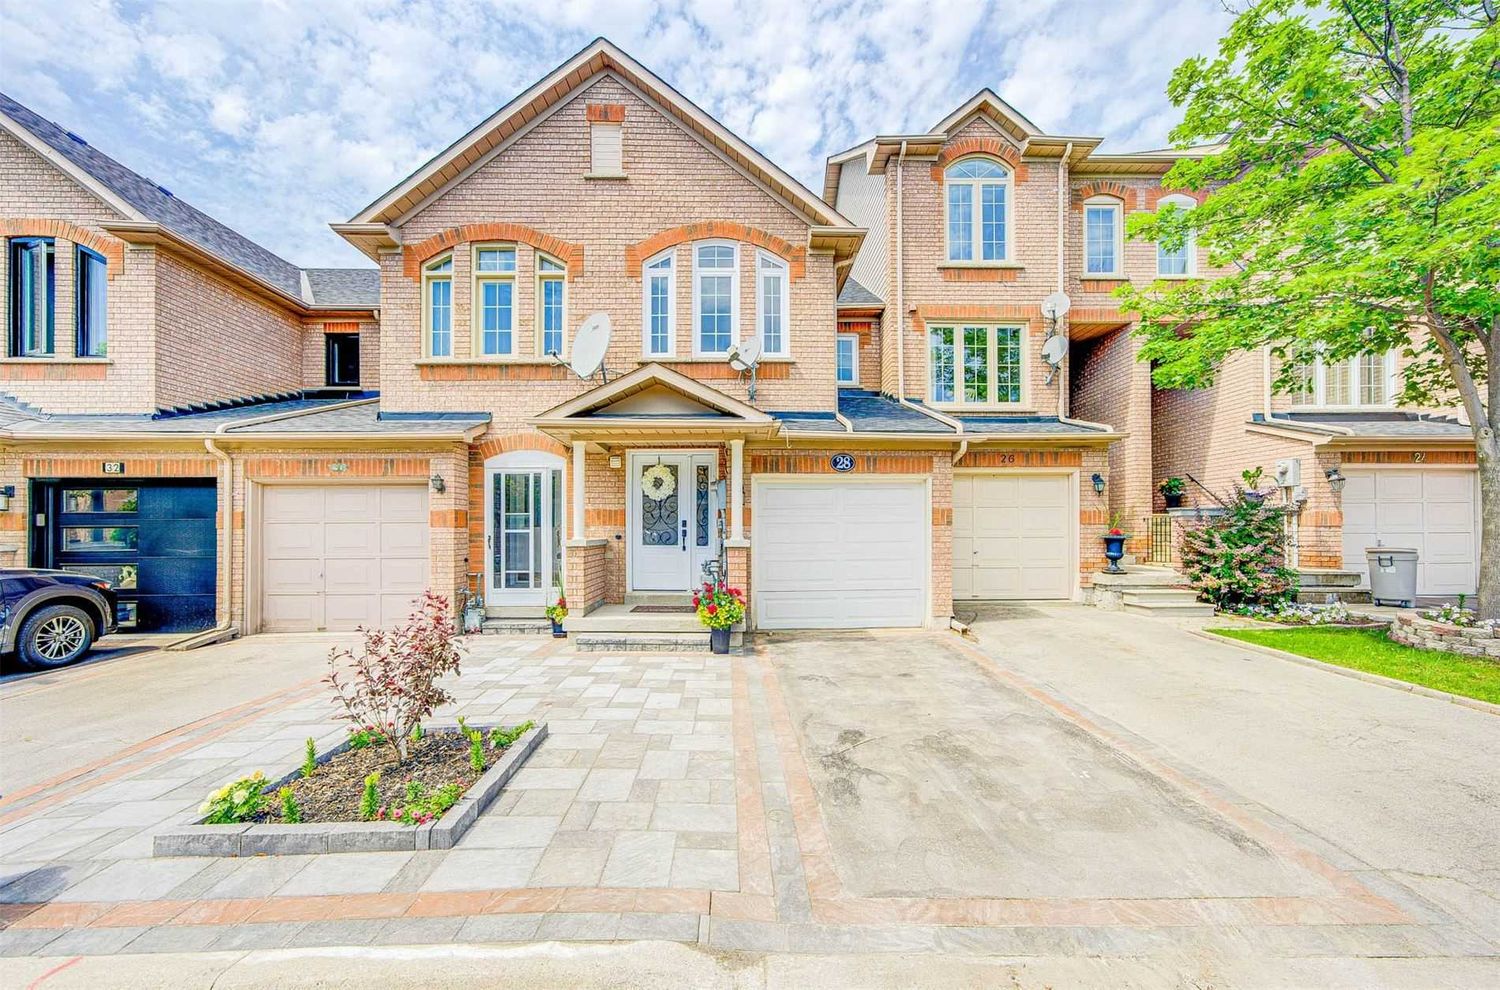 2-92 Tania Crescent. Tania Crescent Townhomes is located in  Vaughan, Toronto - image #1 of 3